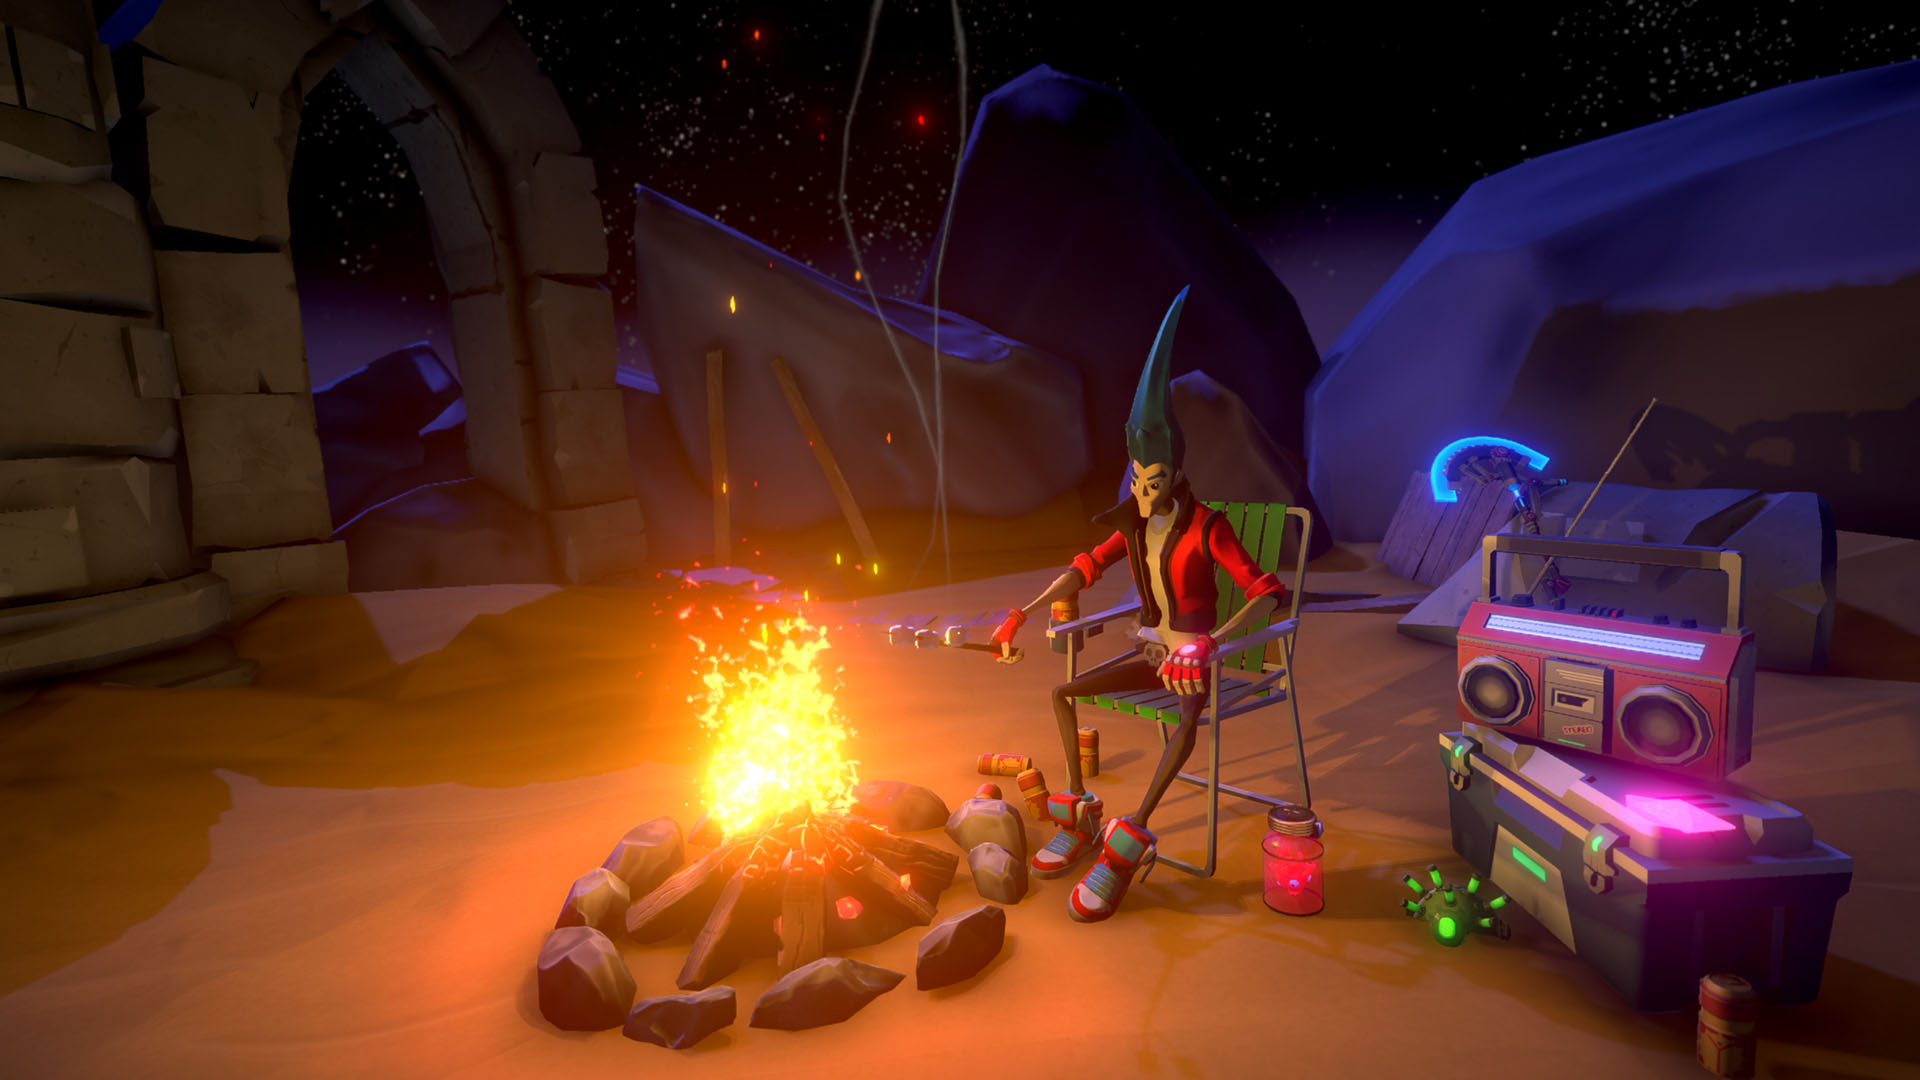 The protagonist sits around a campfire, roasting marshmallows